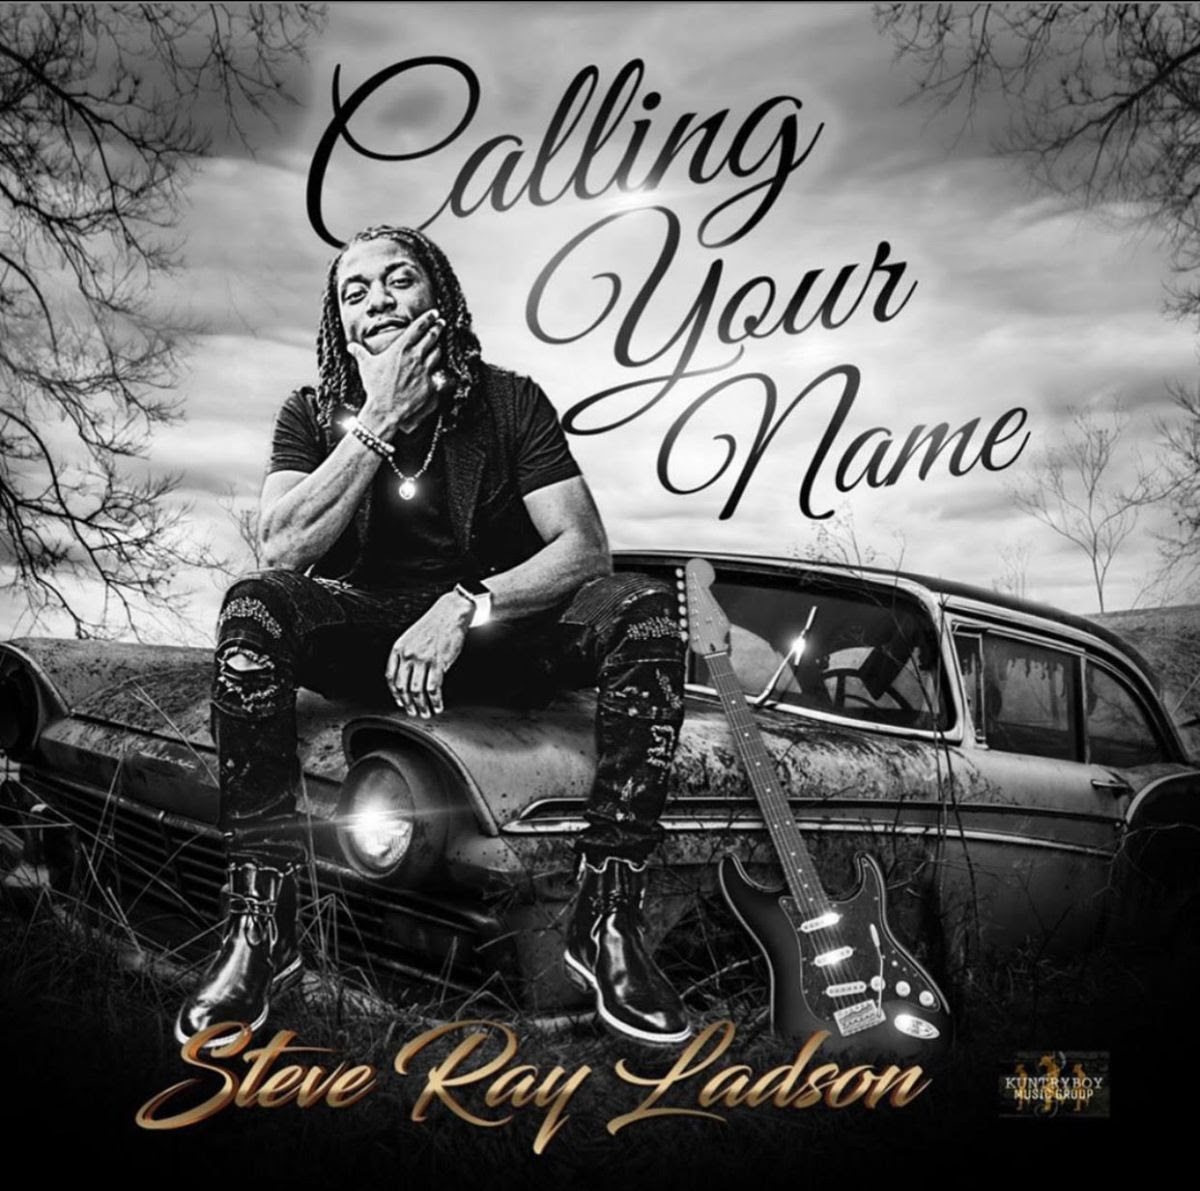 Steve Ray Ladson "Calling Your Name"